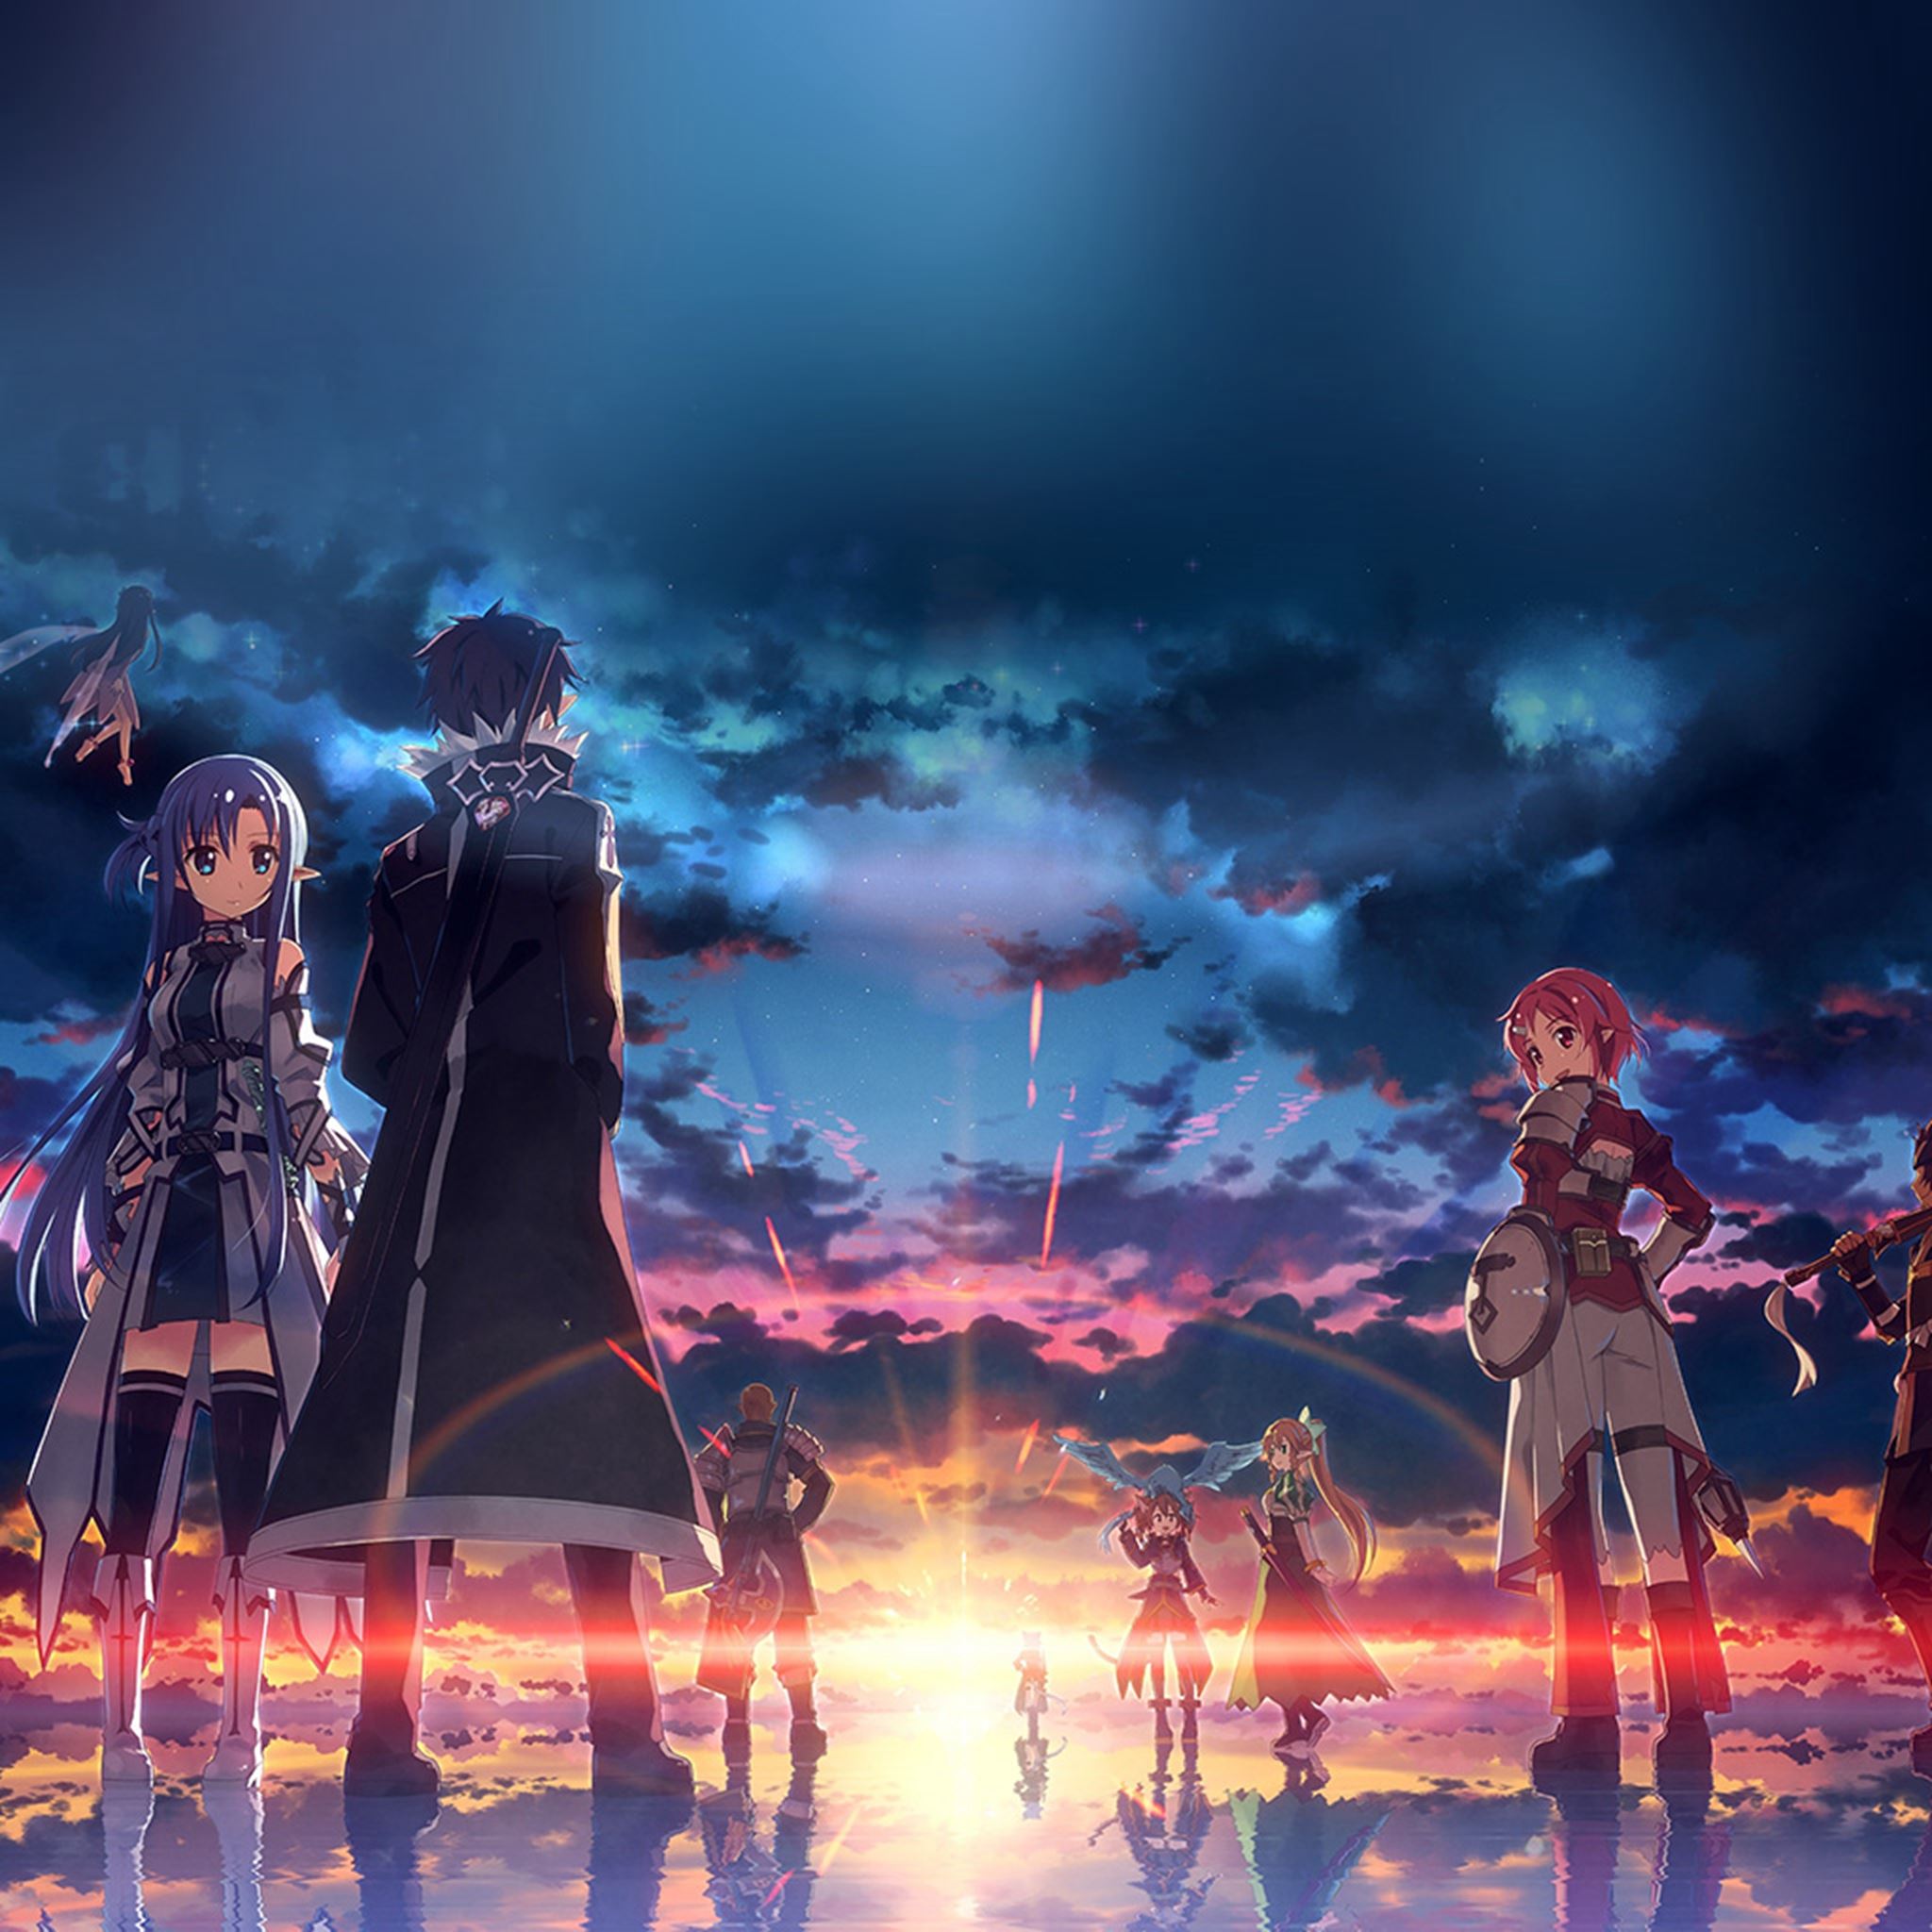 Anime Art Sunset Drawing Ipad Air Wallpapers Free Download